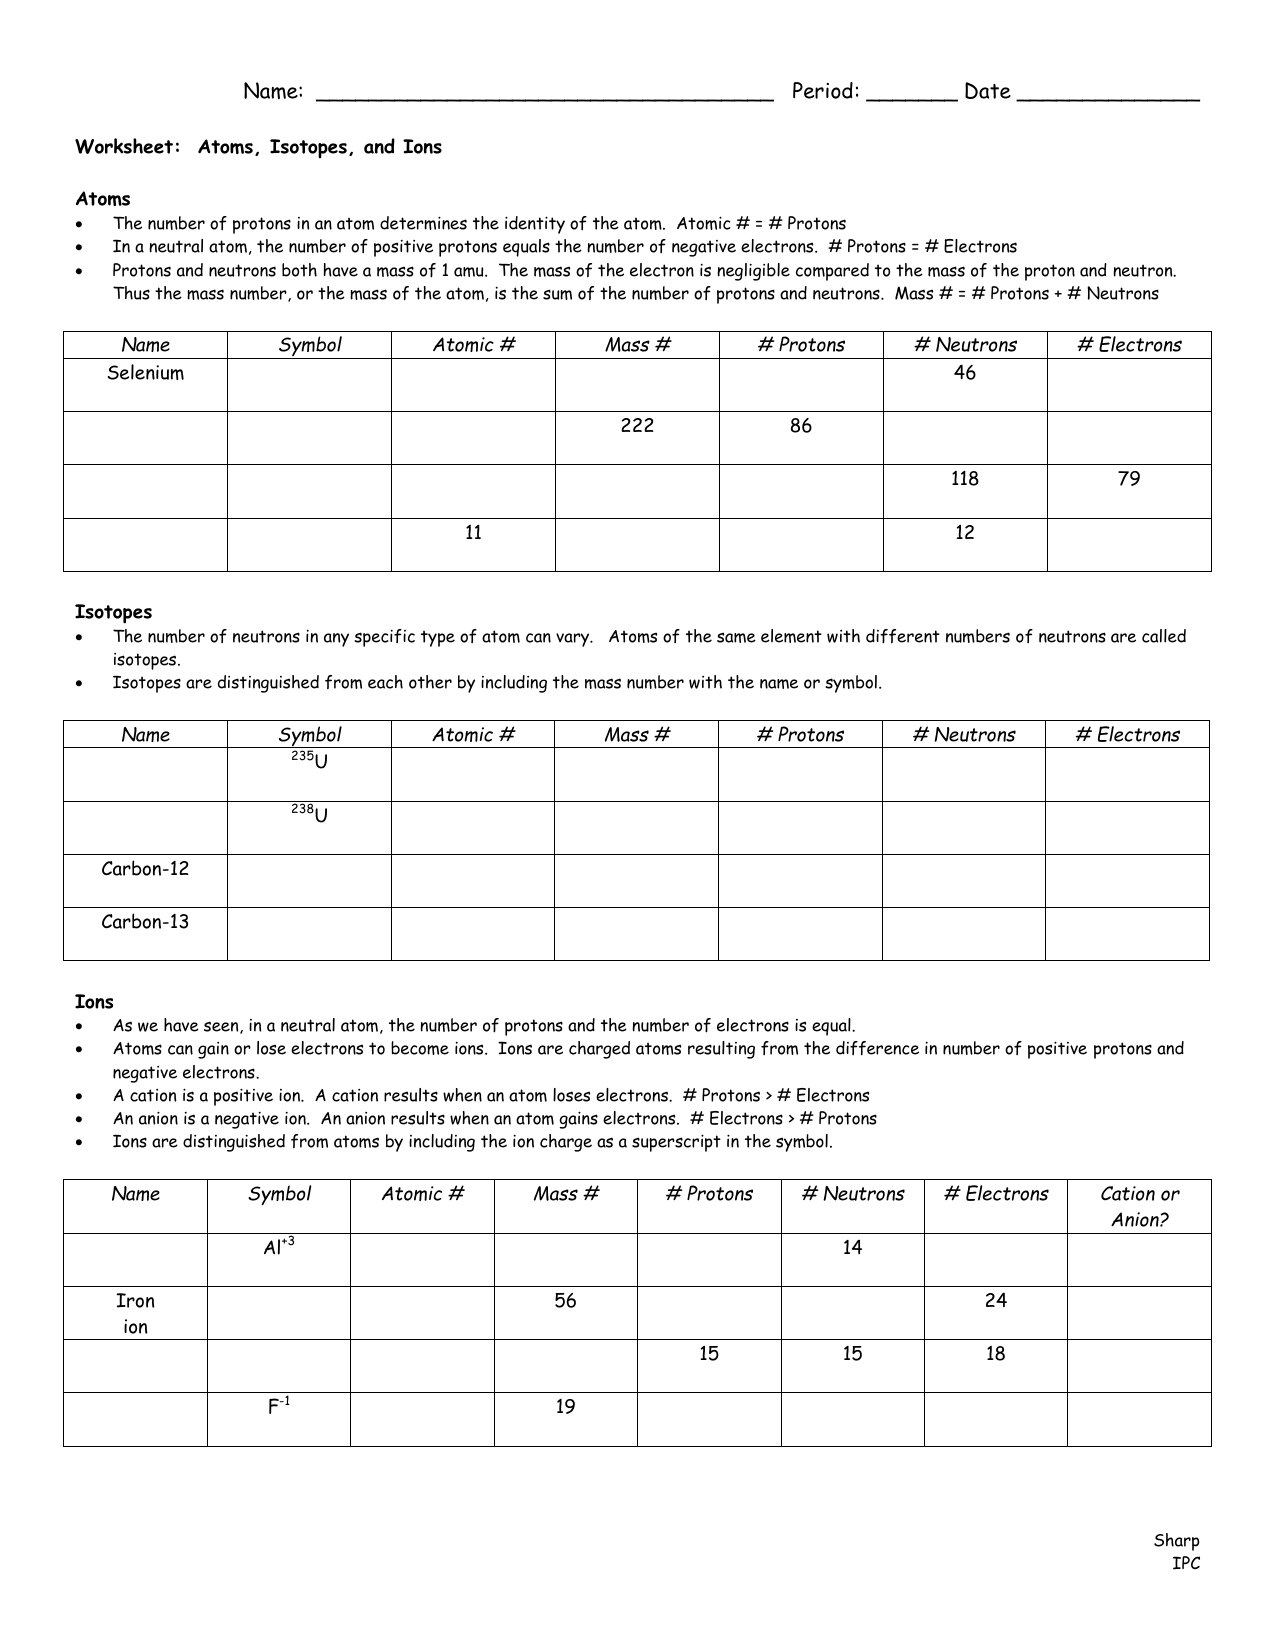 Atoms, Isotopes, & Ions Worksheet With Atoms Vs Ions Worksheet Answers